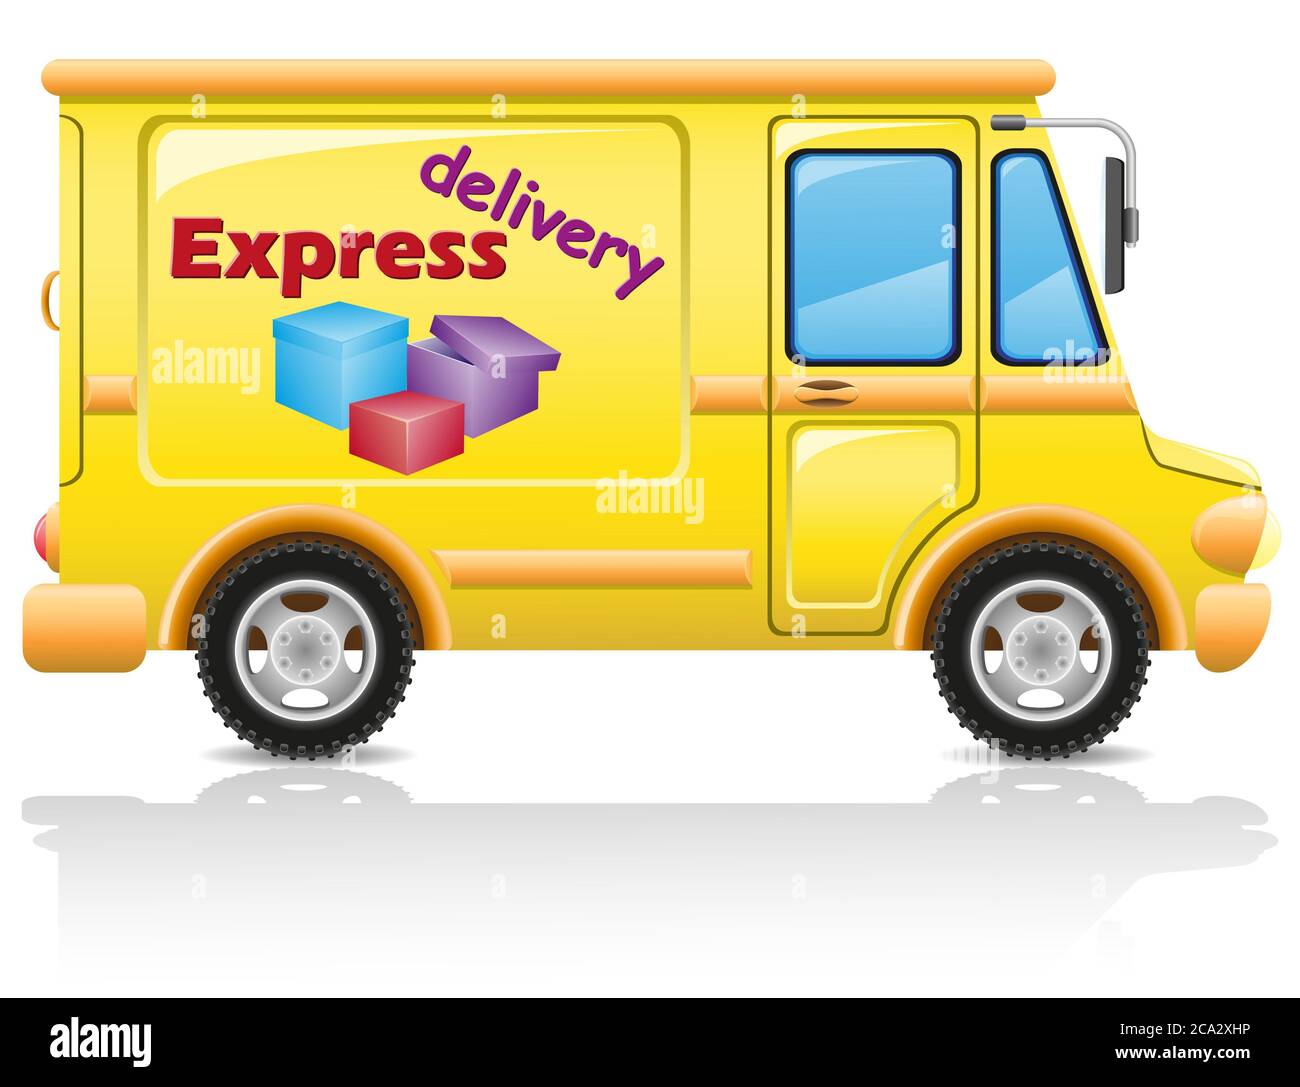 car express delivery of mail and parcels vector illustration isolated on white background. Stock Photo